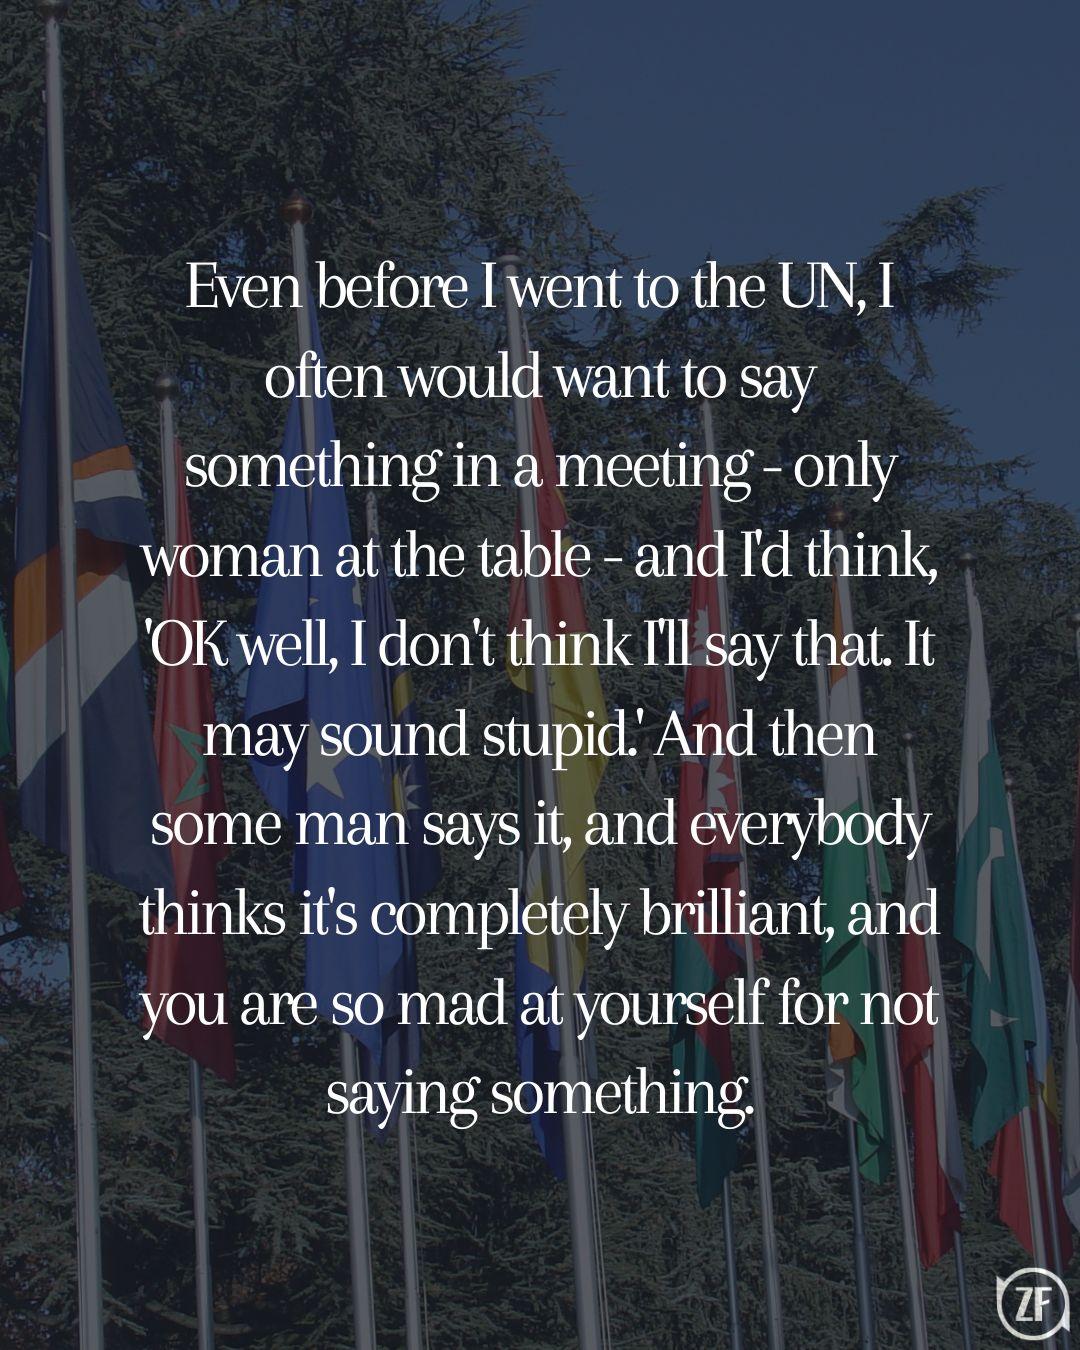 Even before I went to the UN, I often would want to say something in a meeting - only woman at the table - and I'd think, 'OK well, I don't think I'll say that. It may sound stupid.' And then some man says it, and everybody thinks it's completely brilliant, and you are so mad at yourself for not saying something.